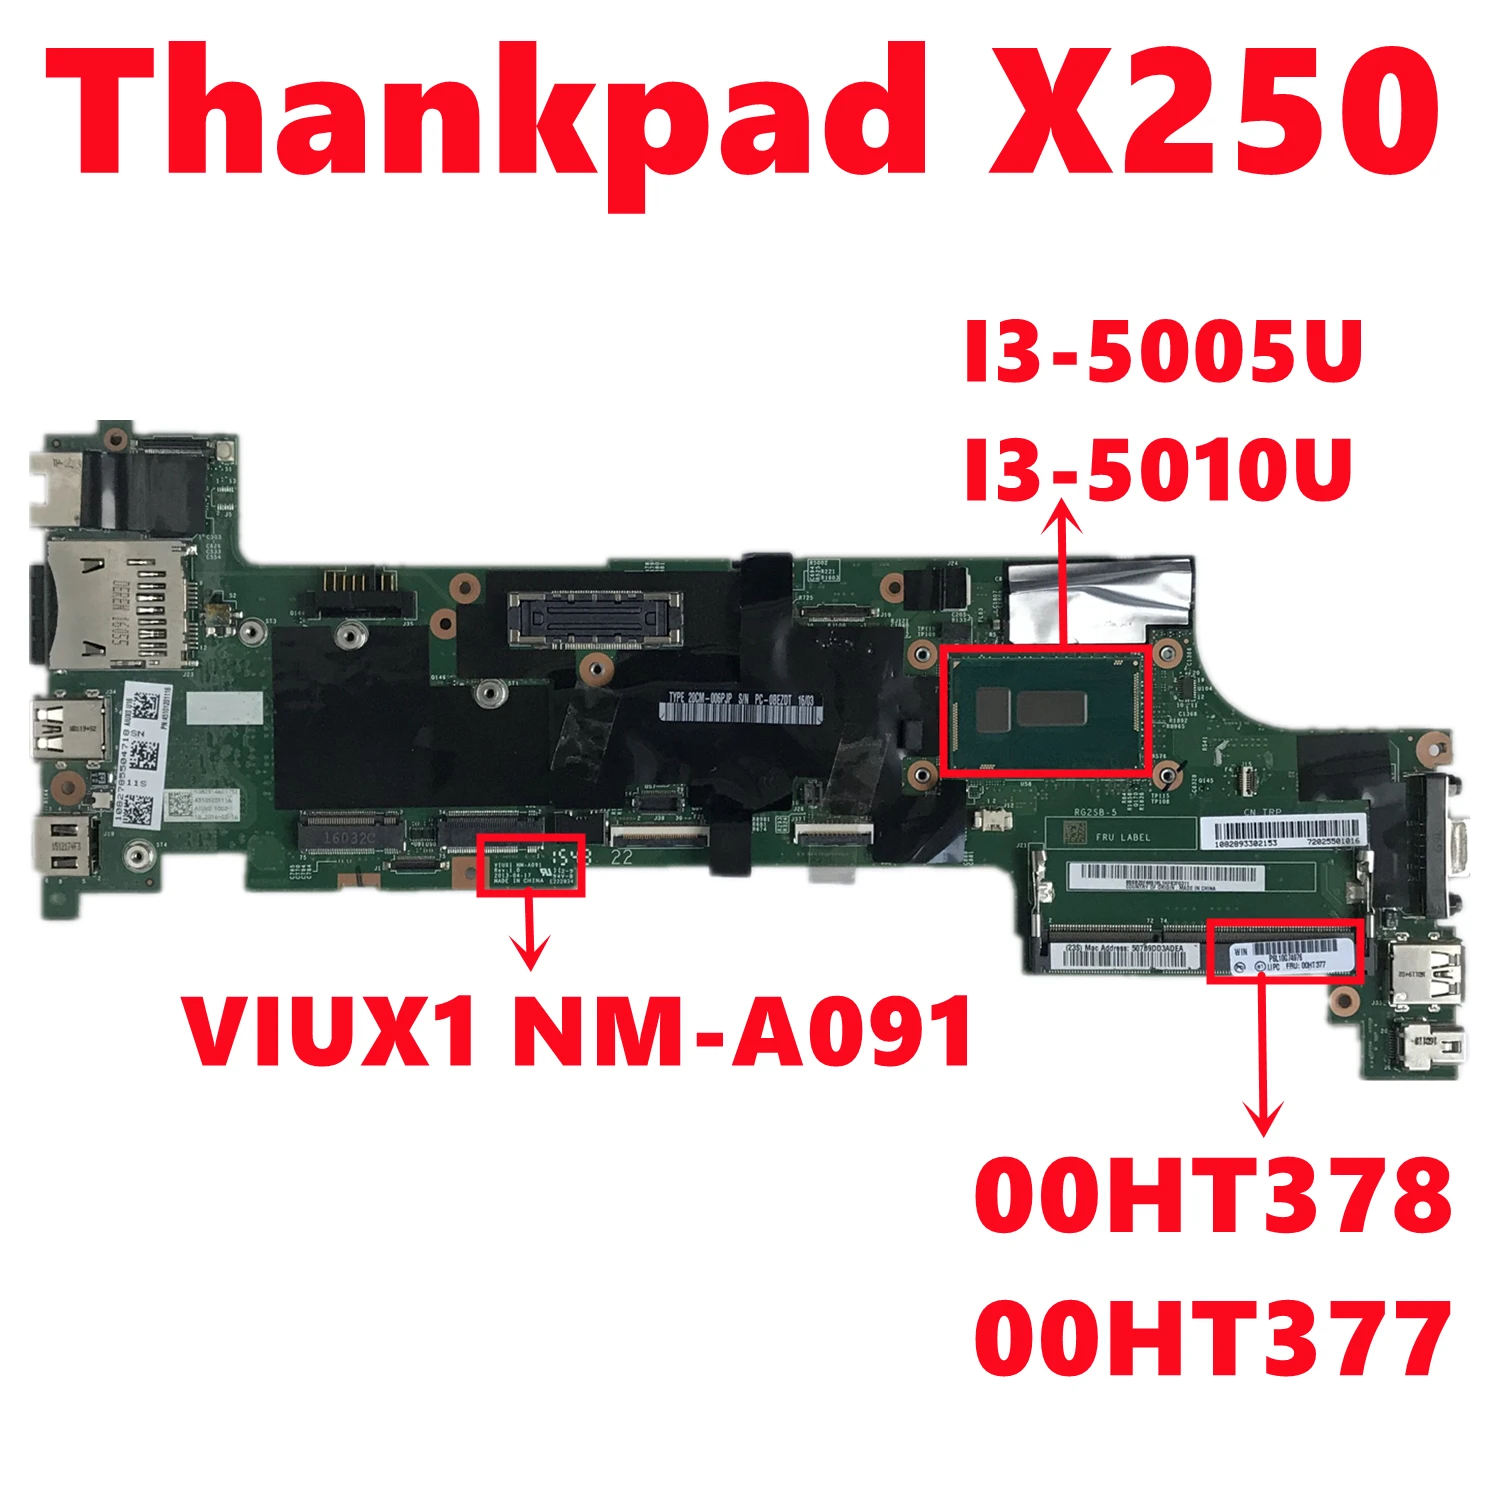 

FRU:00HT378 00HT377 Mainboard For Lenovo Thankpad X250 Laptop Motherboard VIUX1 NM-A091 With I3-5005U I3-5010U CPU 100% Tested